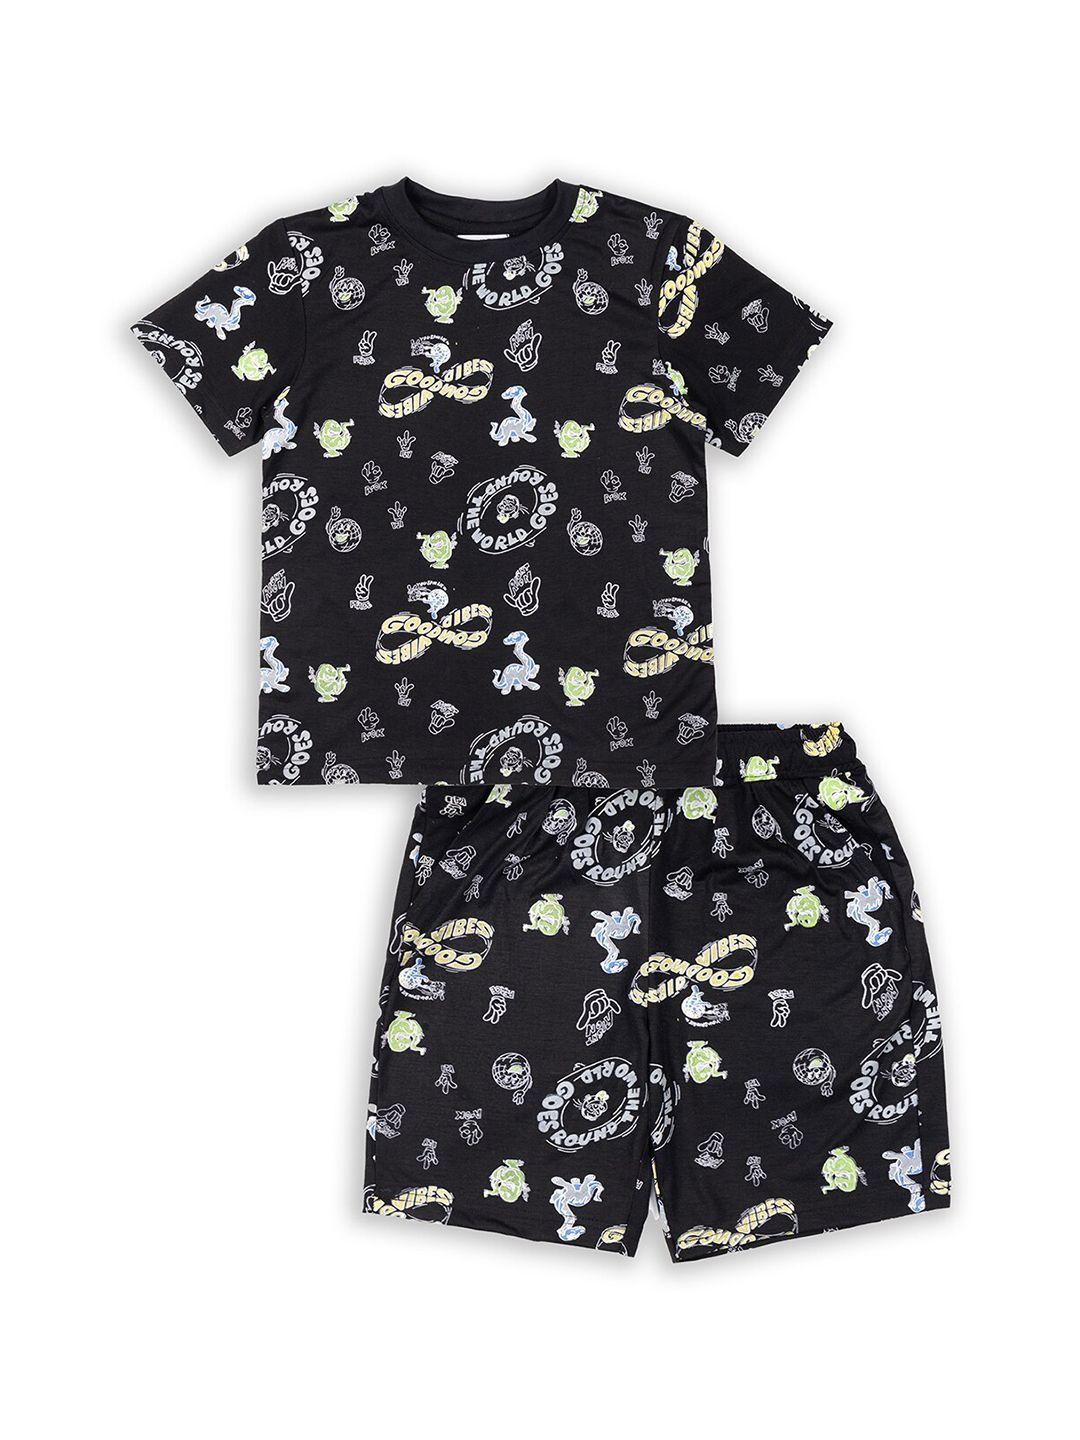 growing tree kids printed t-shirt with shorts